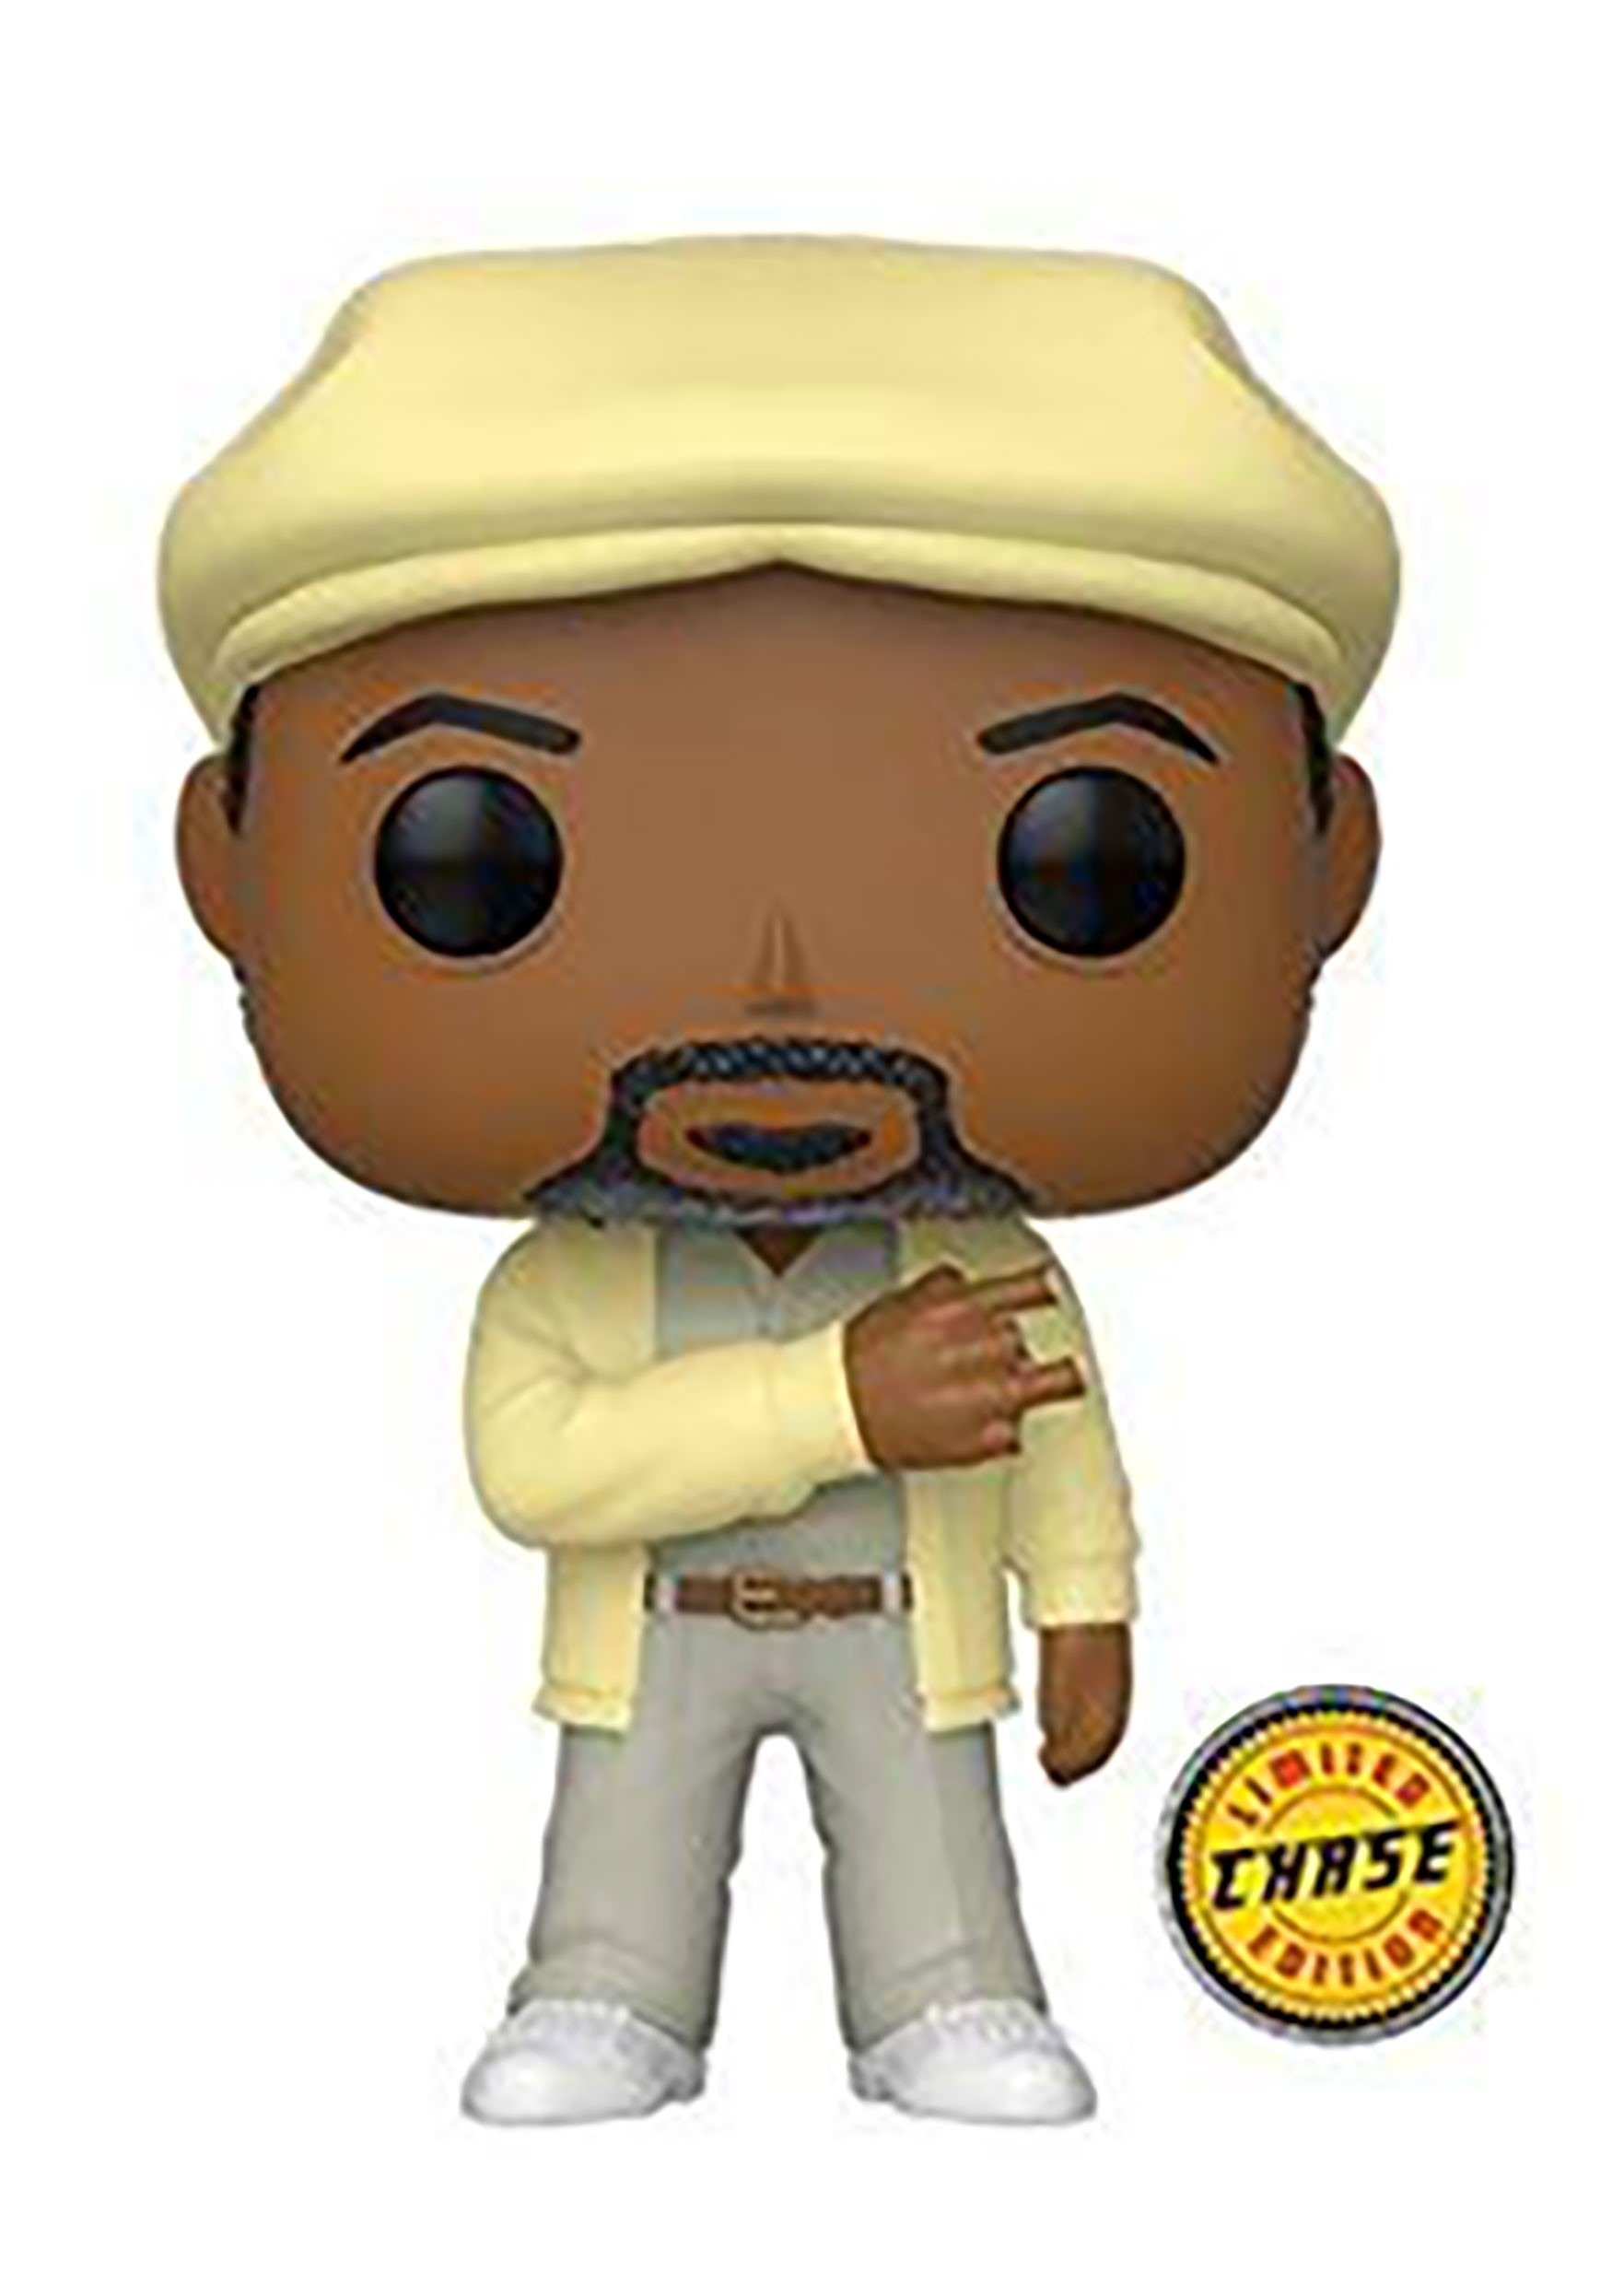 Pop! Movies Chubbs Peterson Happy Gilmore